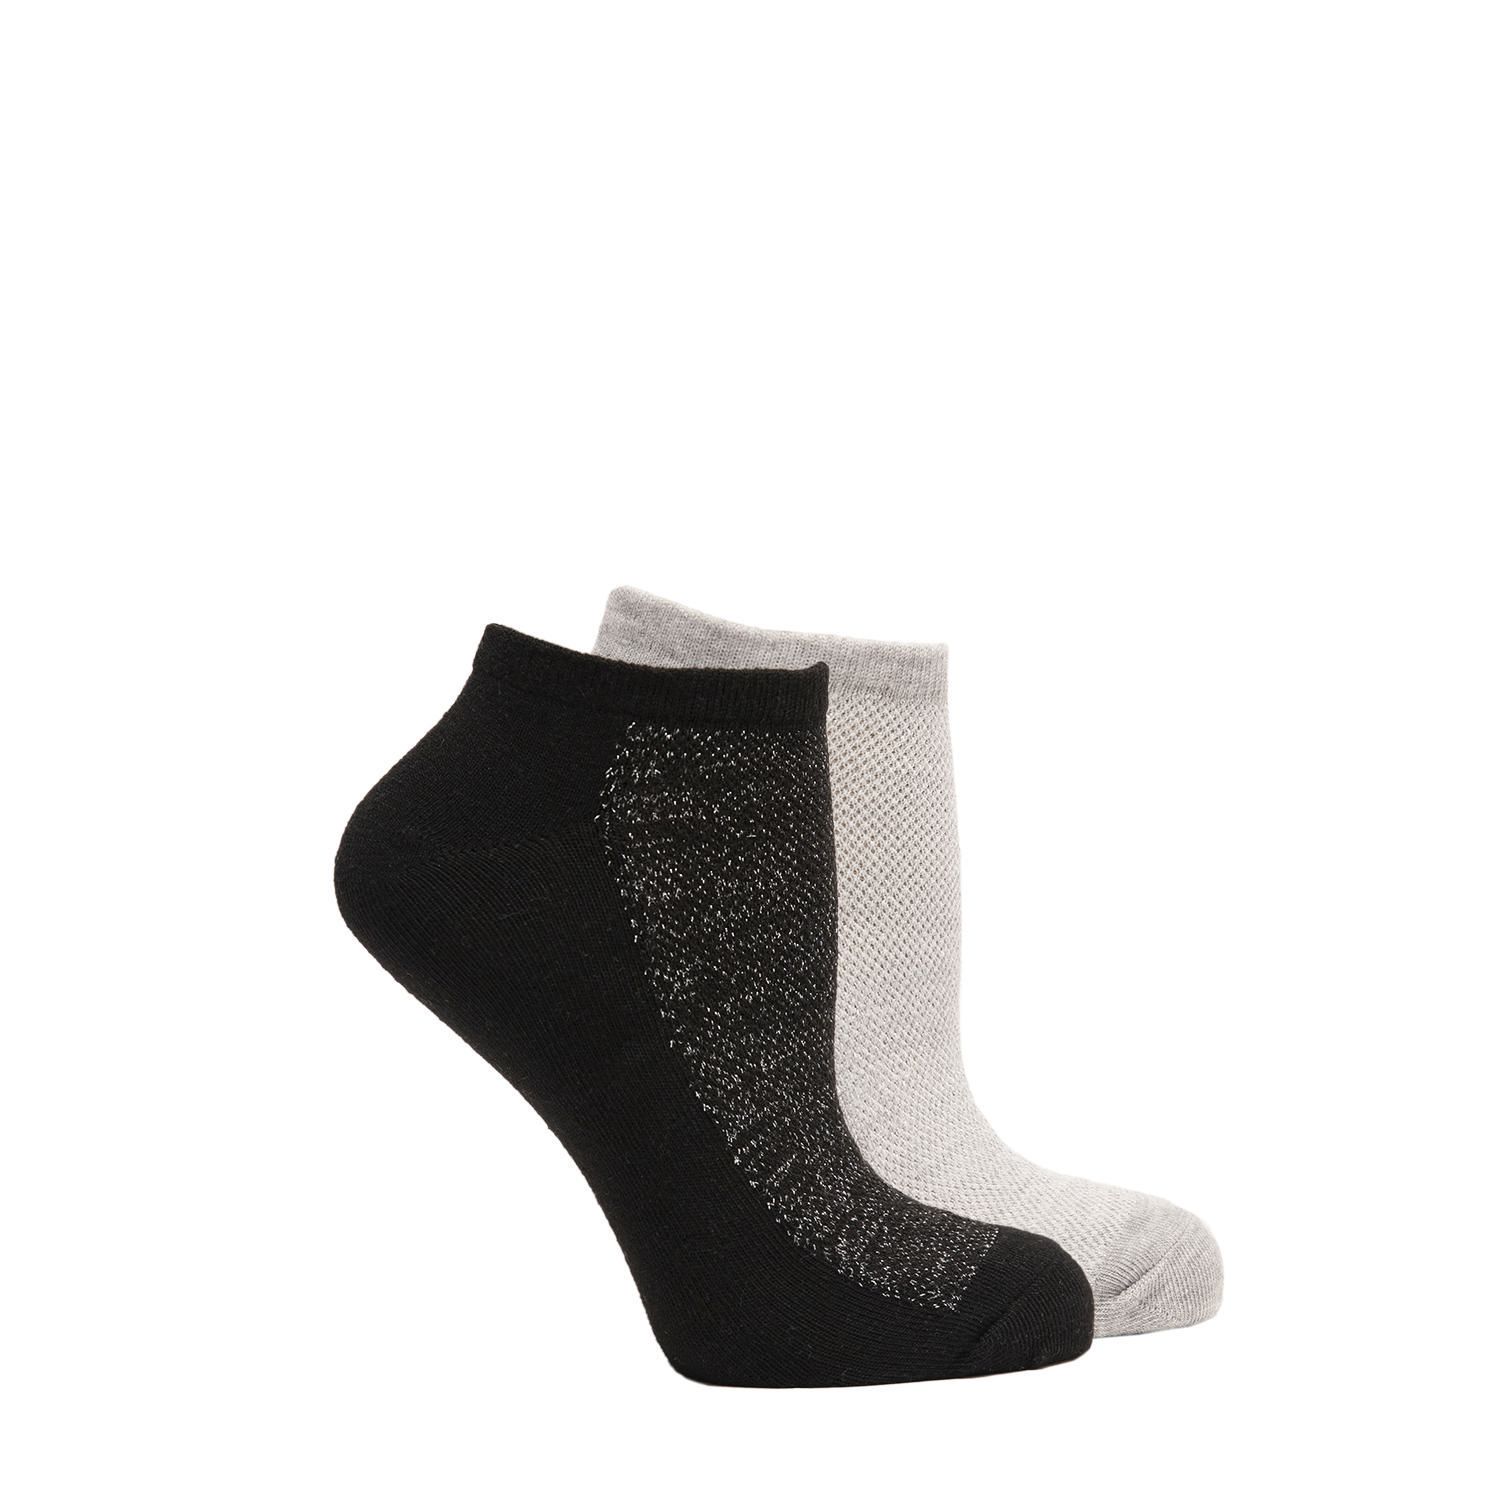 George Women's 2 Pack No Show Sock with Mesh And Lurex Top | Walmart Canada